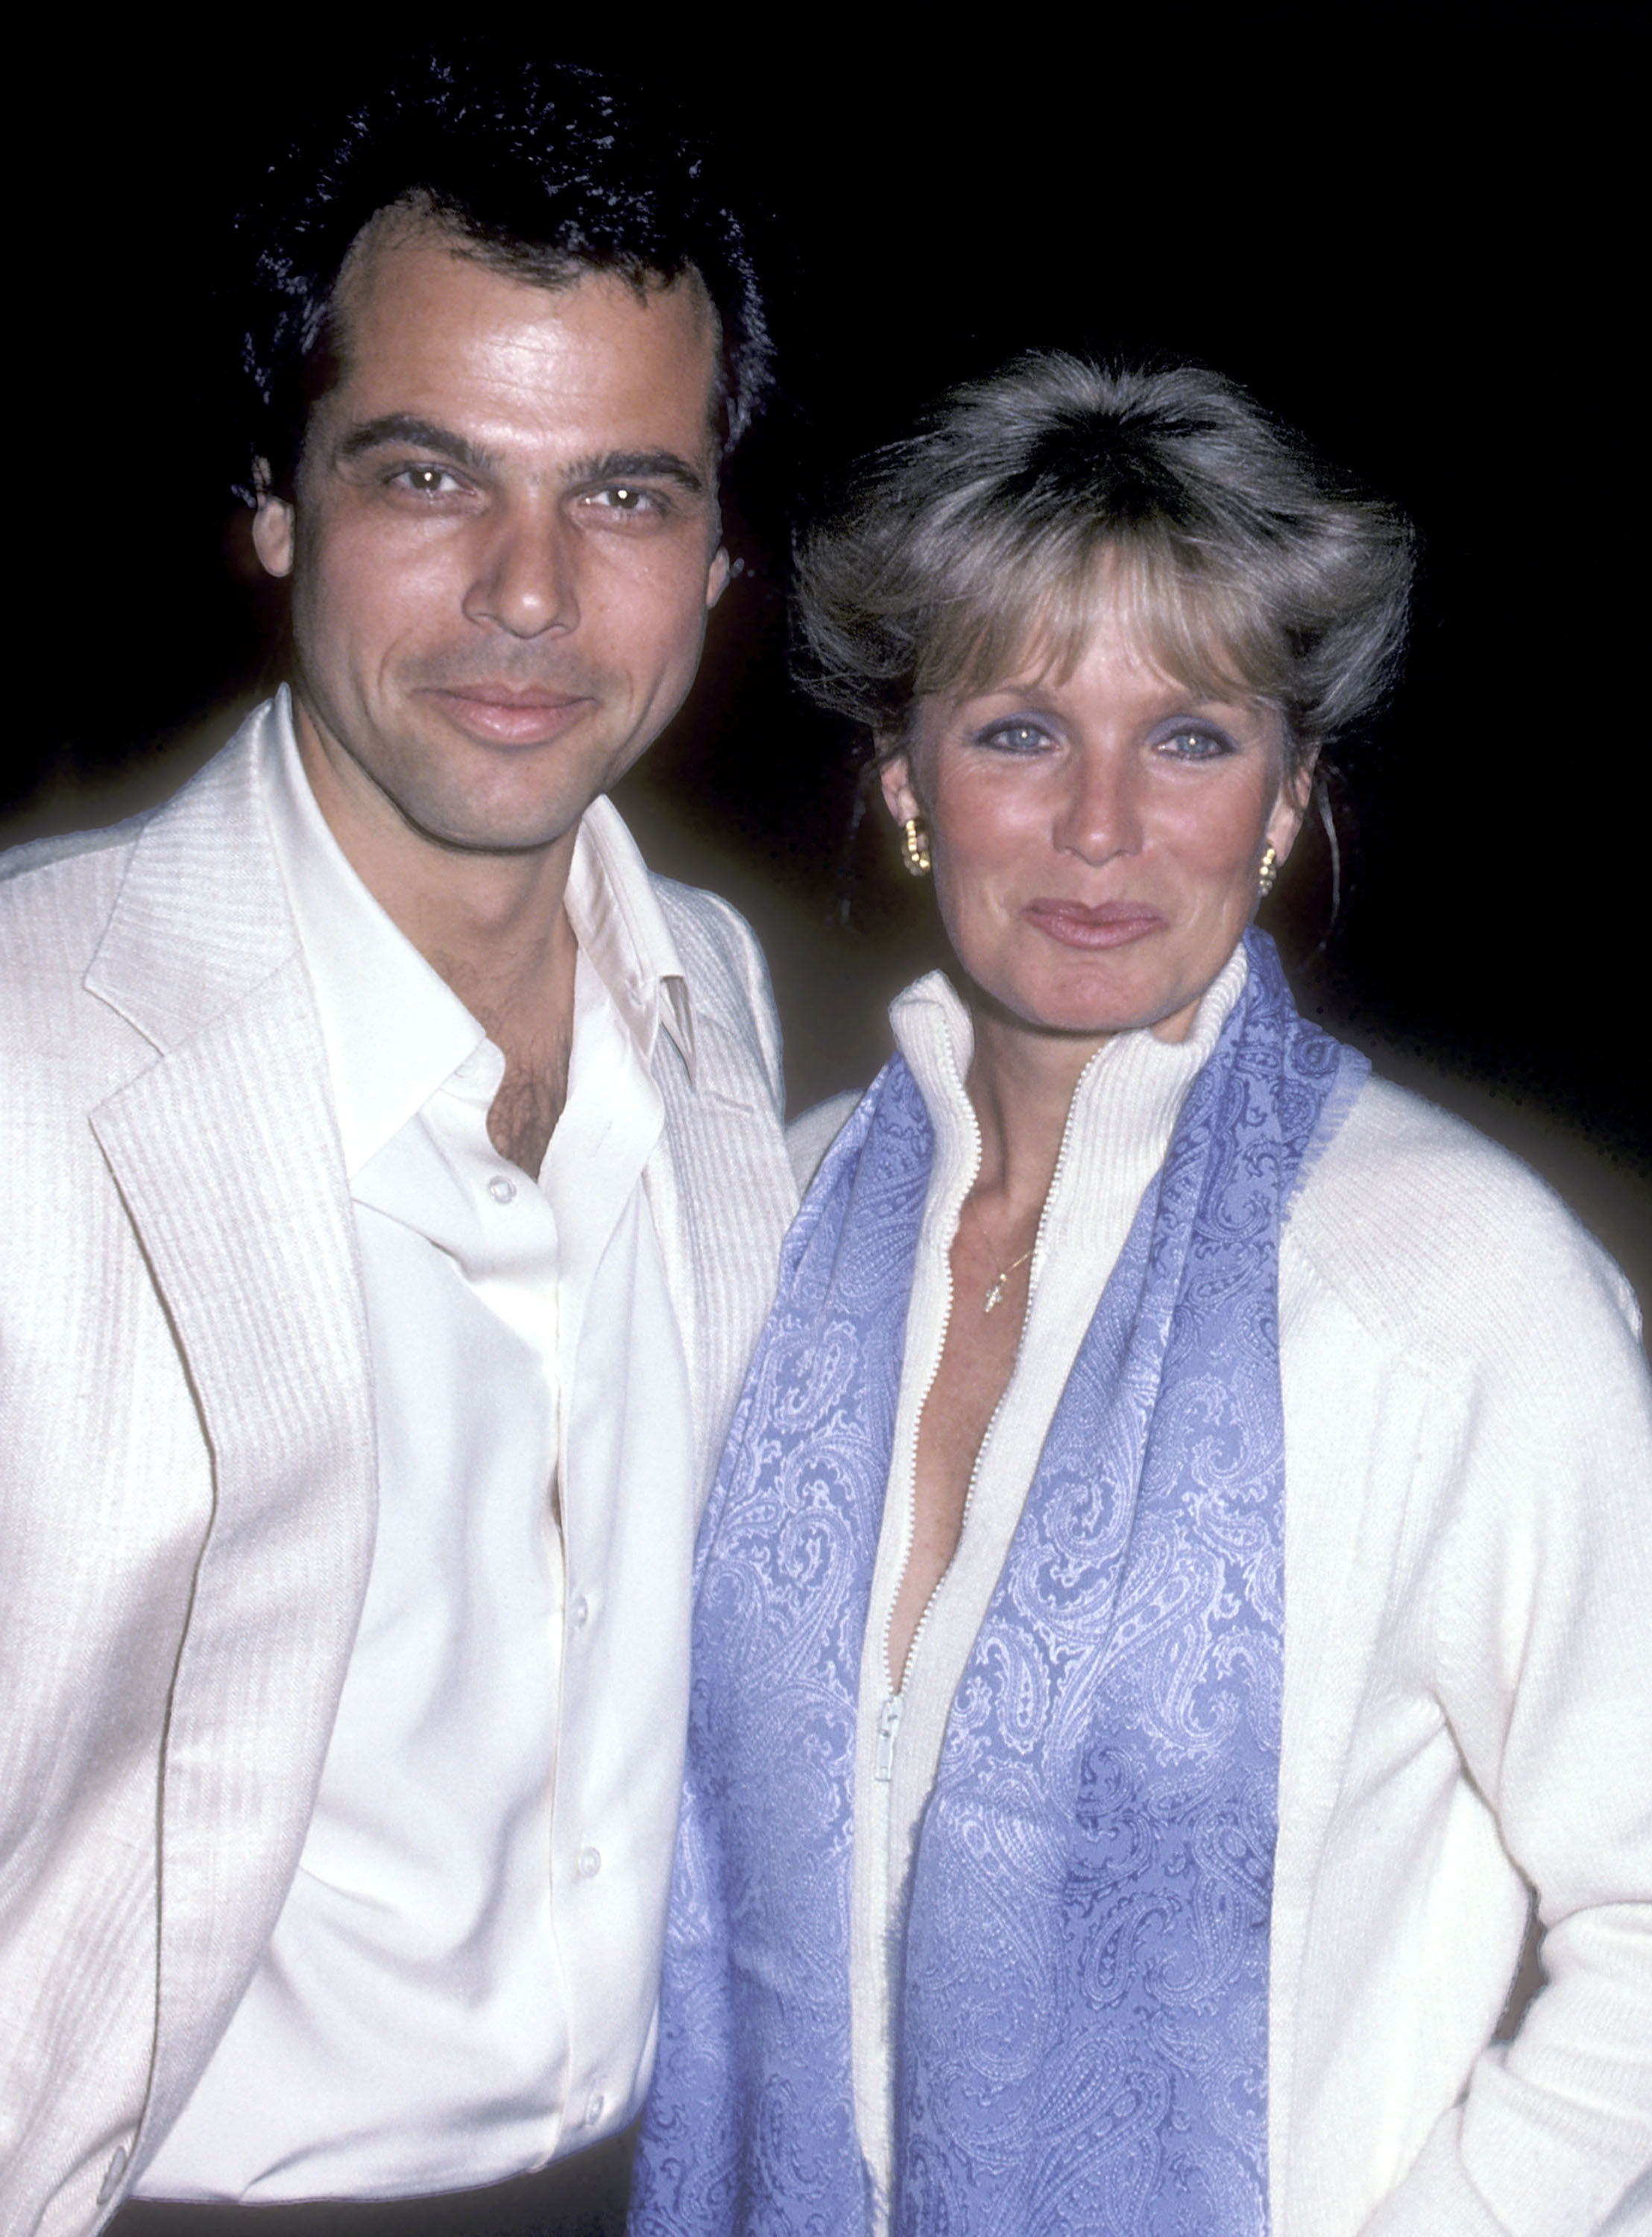 Linda Evans and George Santo Pietro attend the Santo Pietro's Restaurant Grand Opening Celebration at Santo Pietro's Restaurant, Beverly Glen Center on January 21, 1983 in Los Angeles, California. | Source: Getty Images